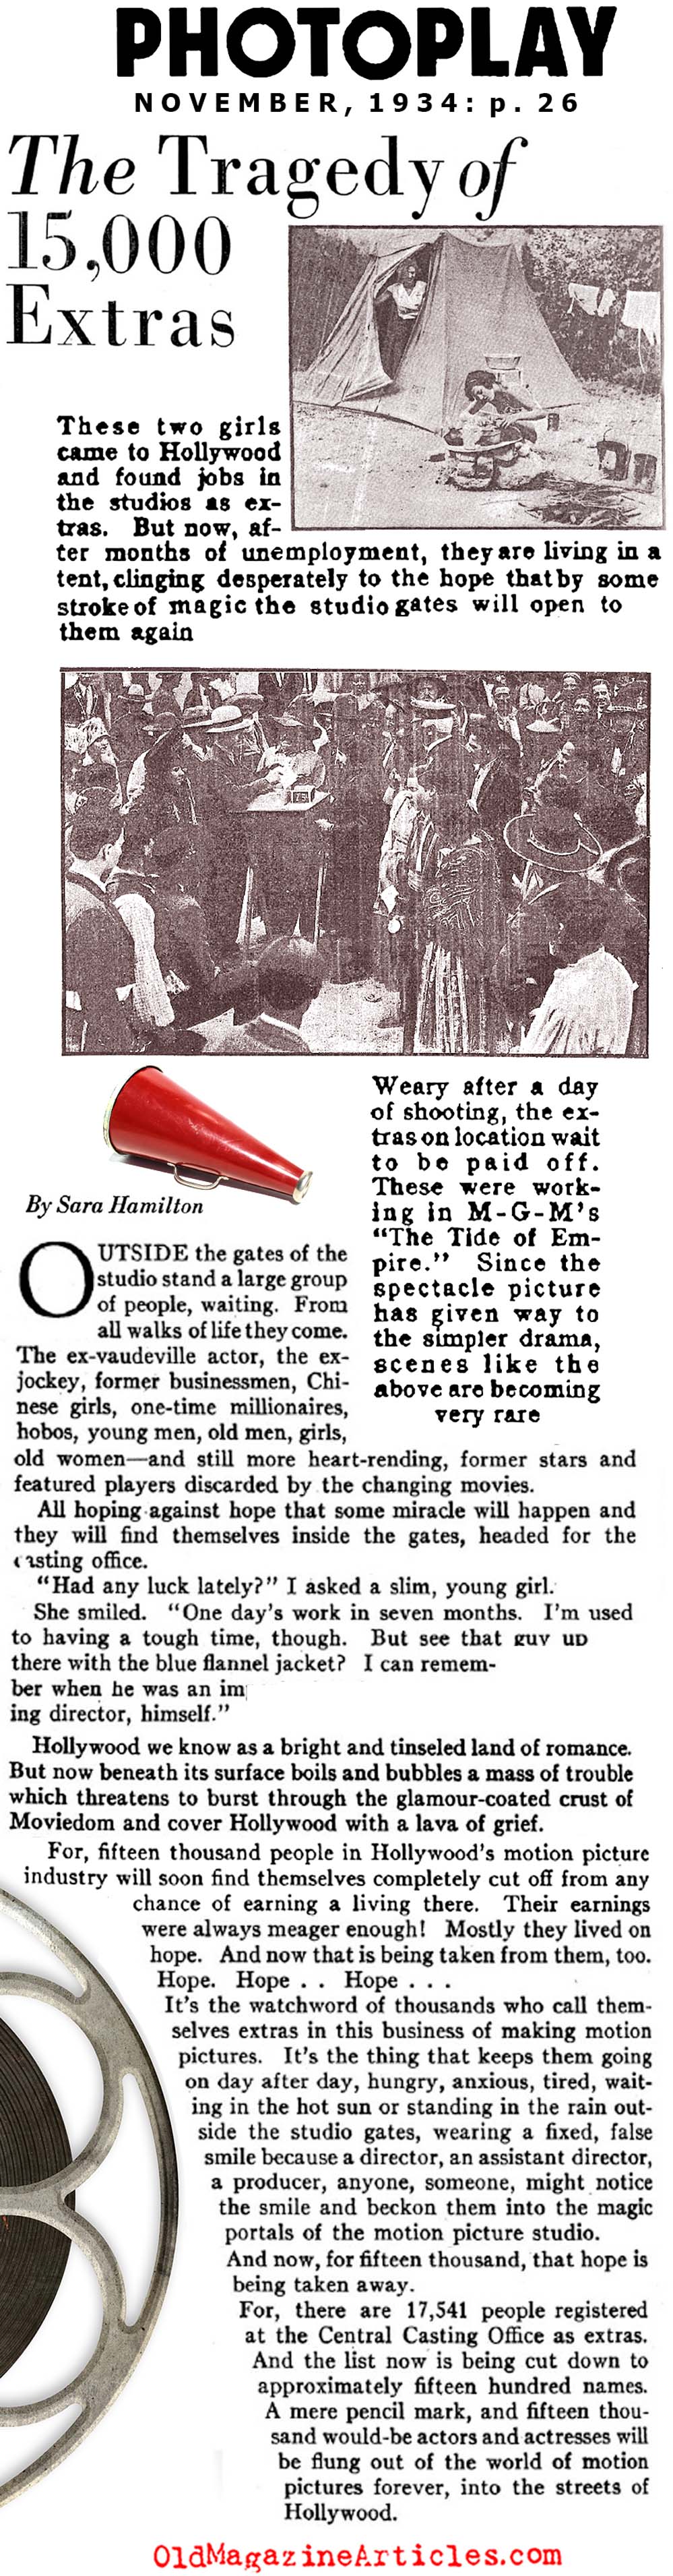 During the Depression Unskilled Labor Flocked to Hollywood  (Photoplay Magazine, 1934)